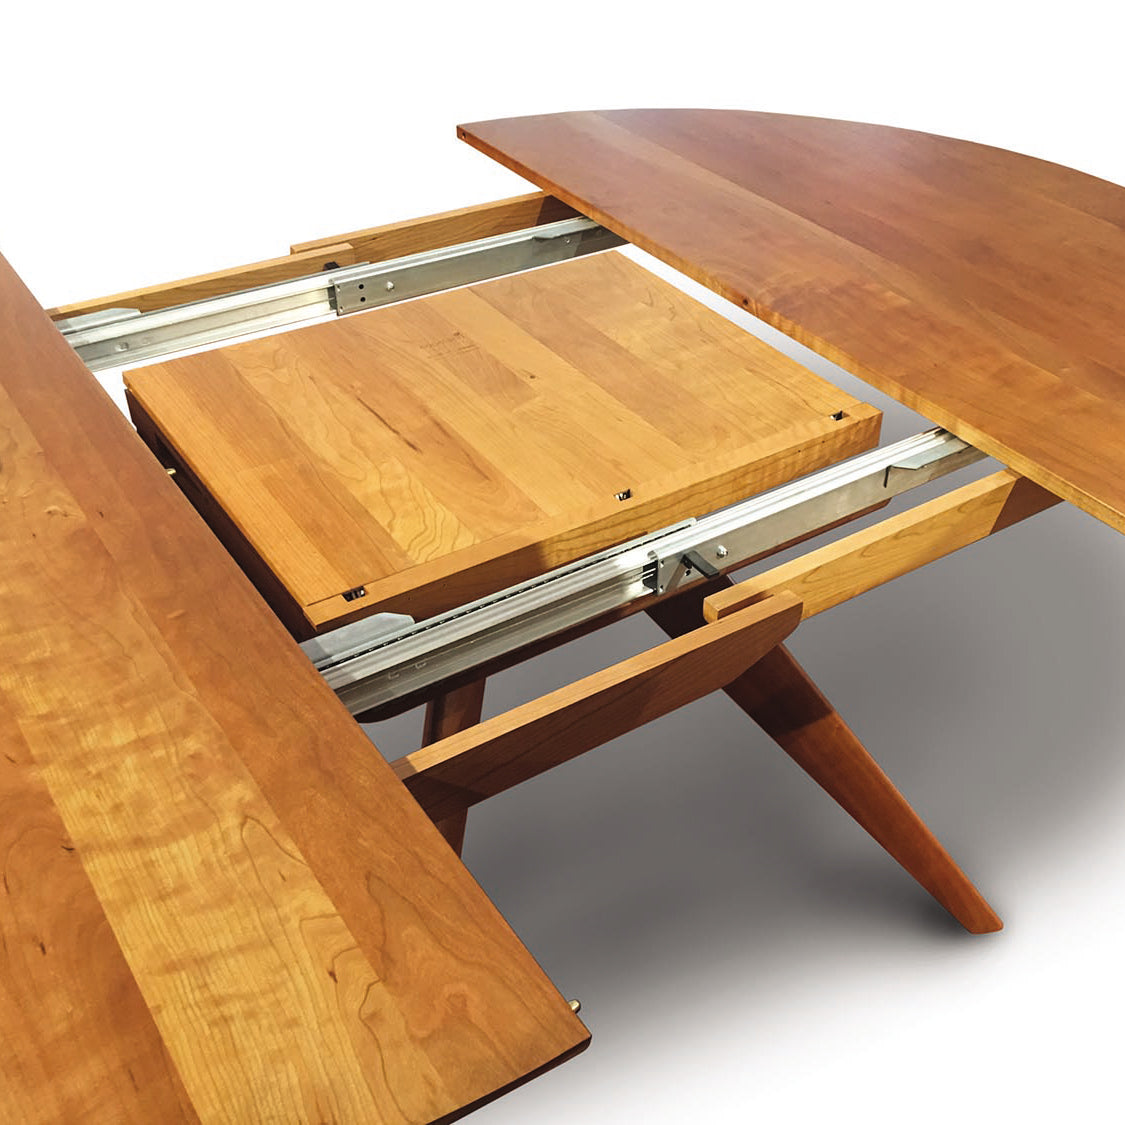 A wooden dining table with a sliding top.